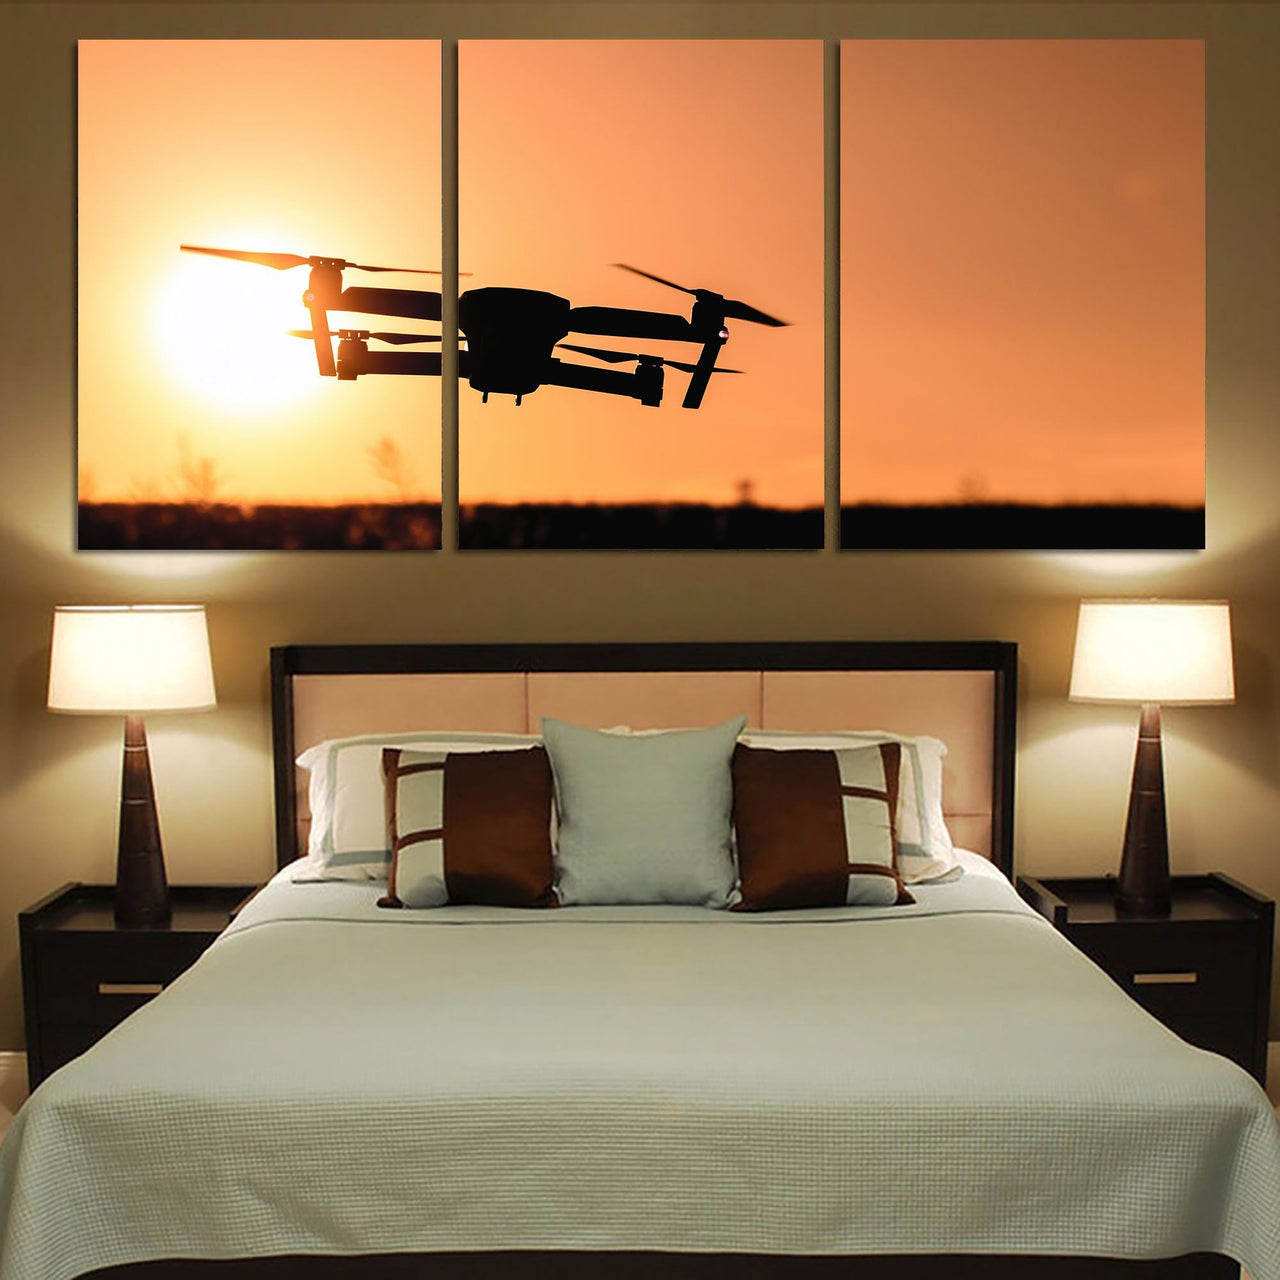 Amazing Drone in Sunset Printed Canvas Posters (3 Pieces) Aviation Shop 